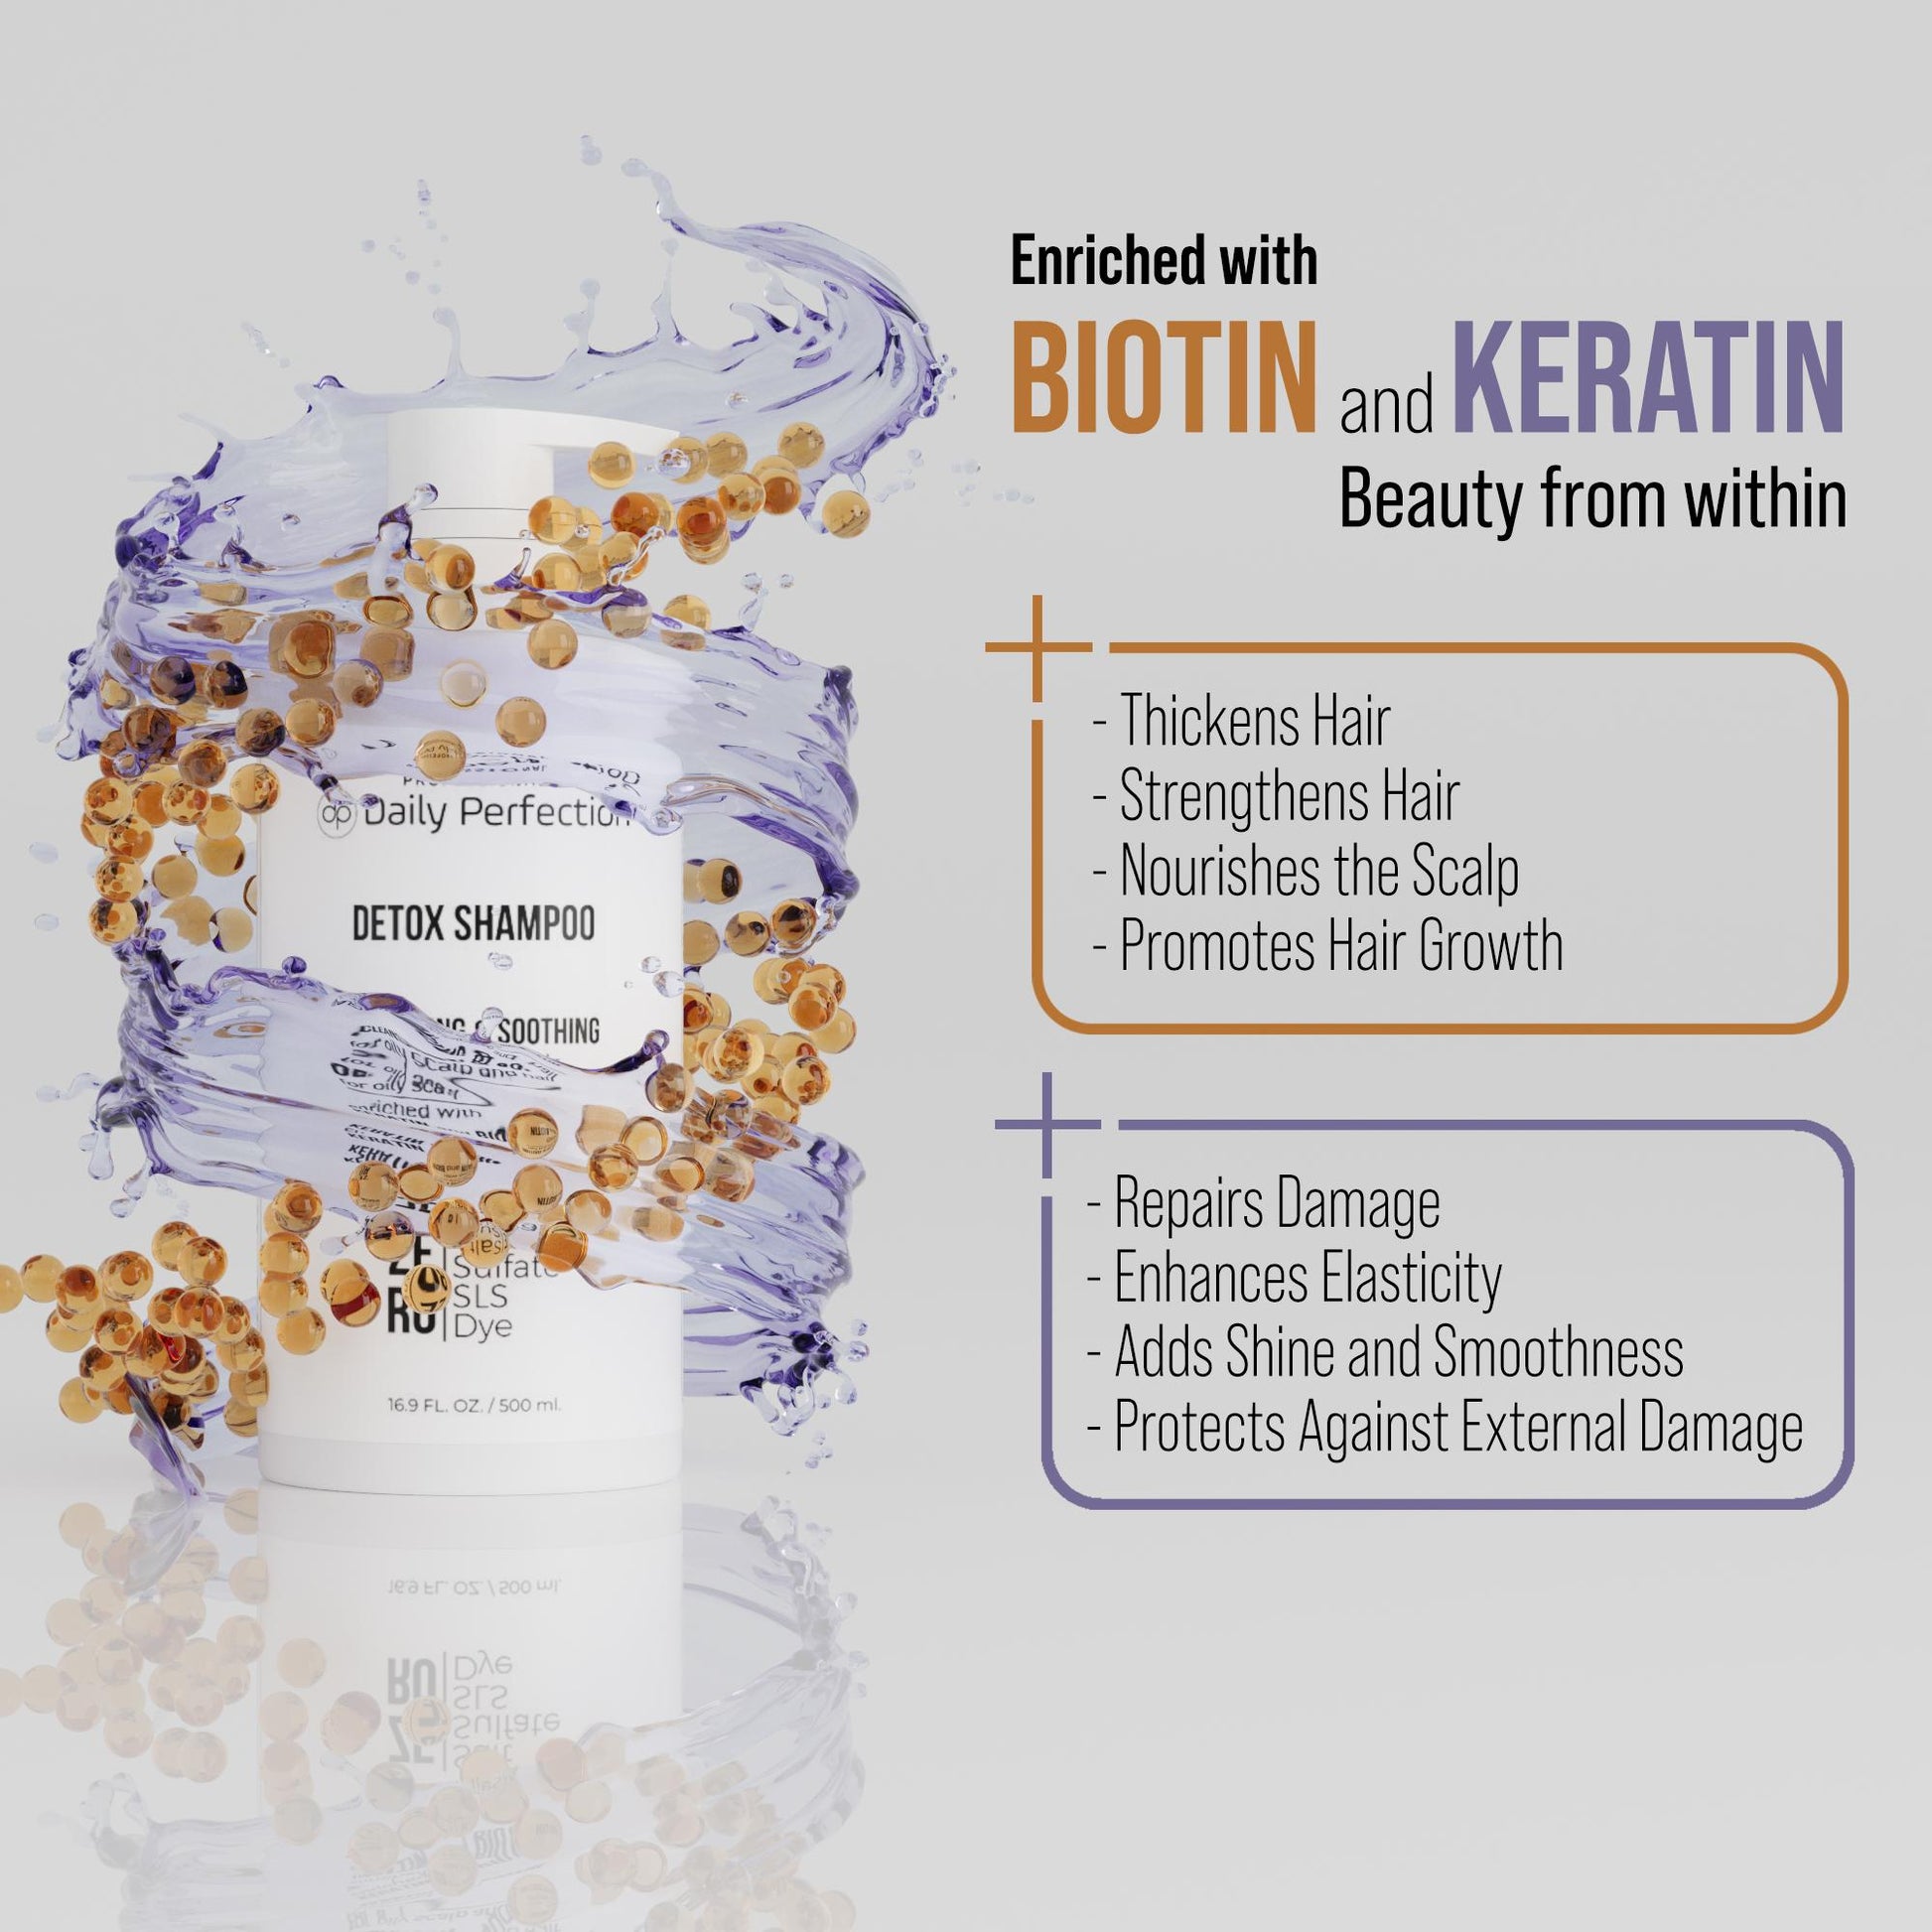 infographic explains the benefits of biotin and kertain boosts which are used in Daily Perfection Detox Shampoo